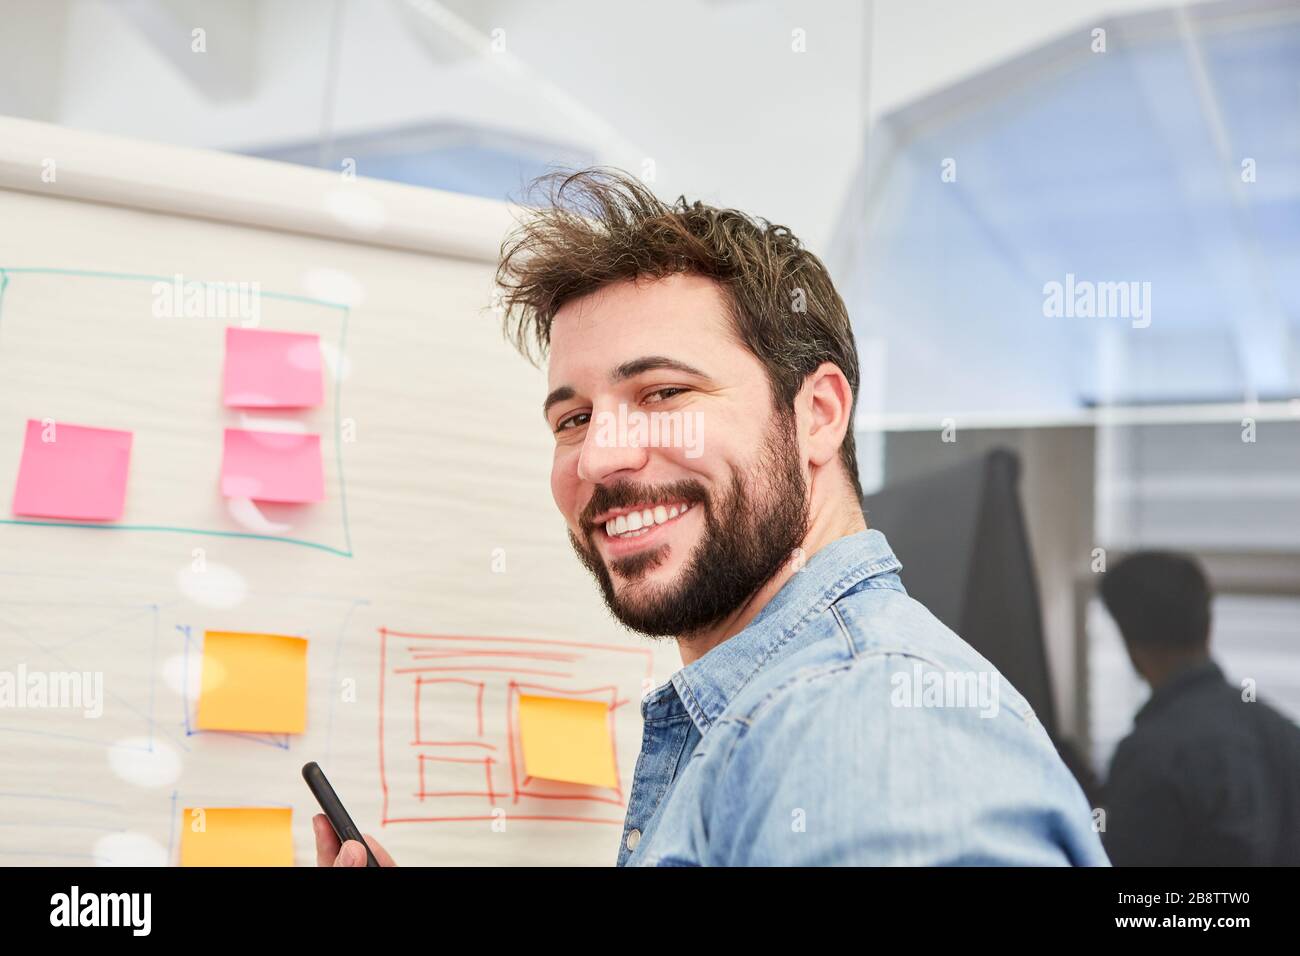 Self-confident founder in front of a flipchart with sticky notes and graphics Stock Photo